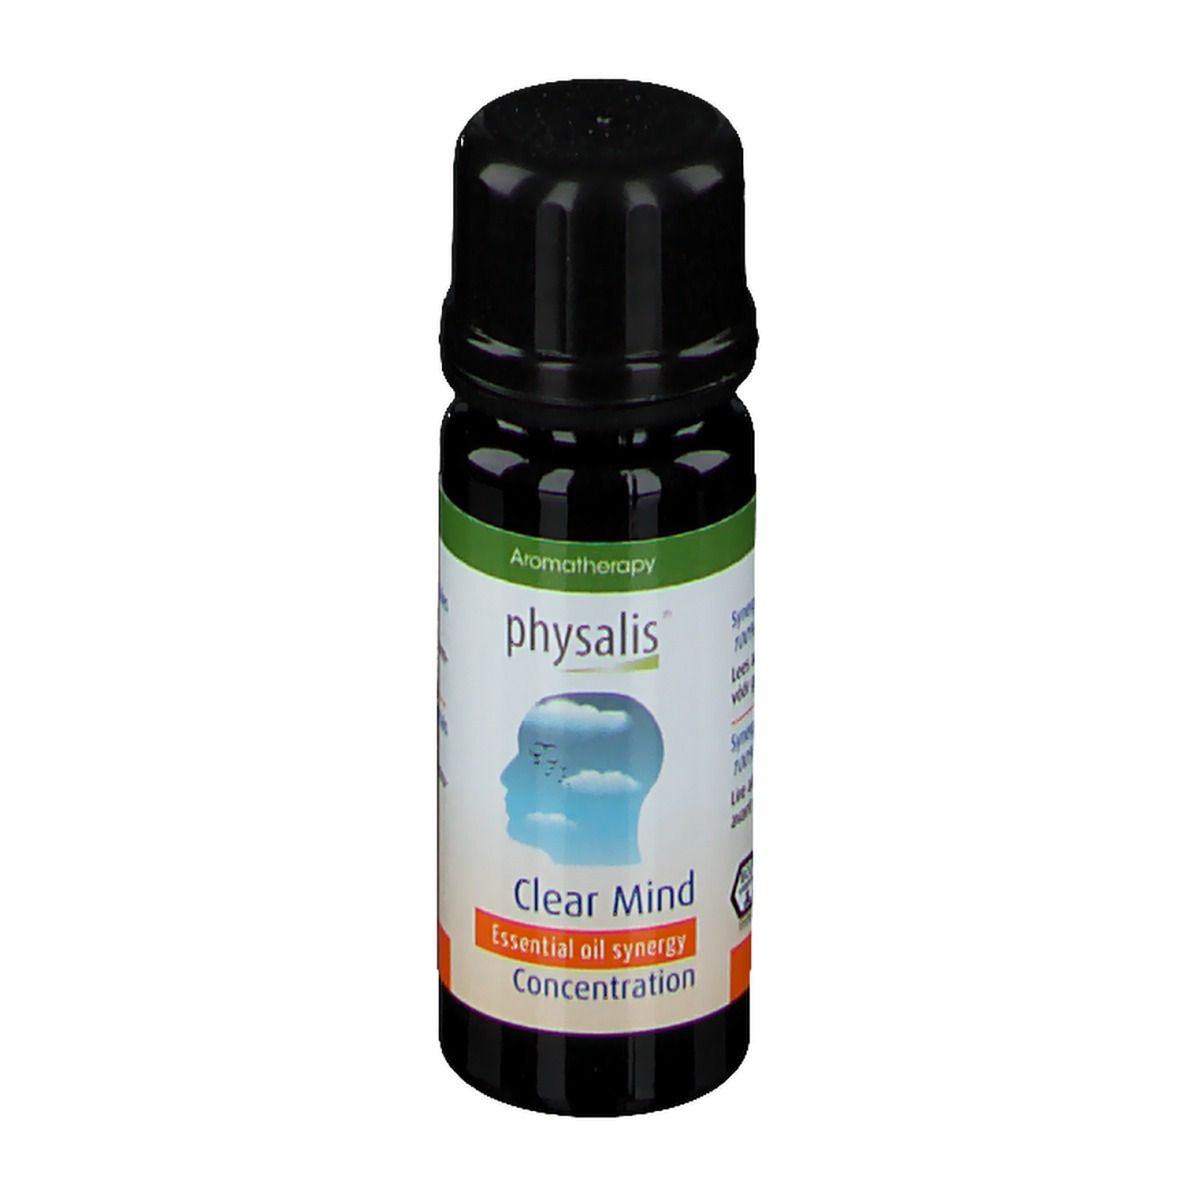 physalis® Synergy Clear Mind Concentration Huile essentielle Bio